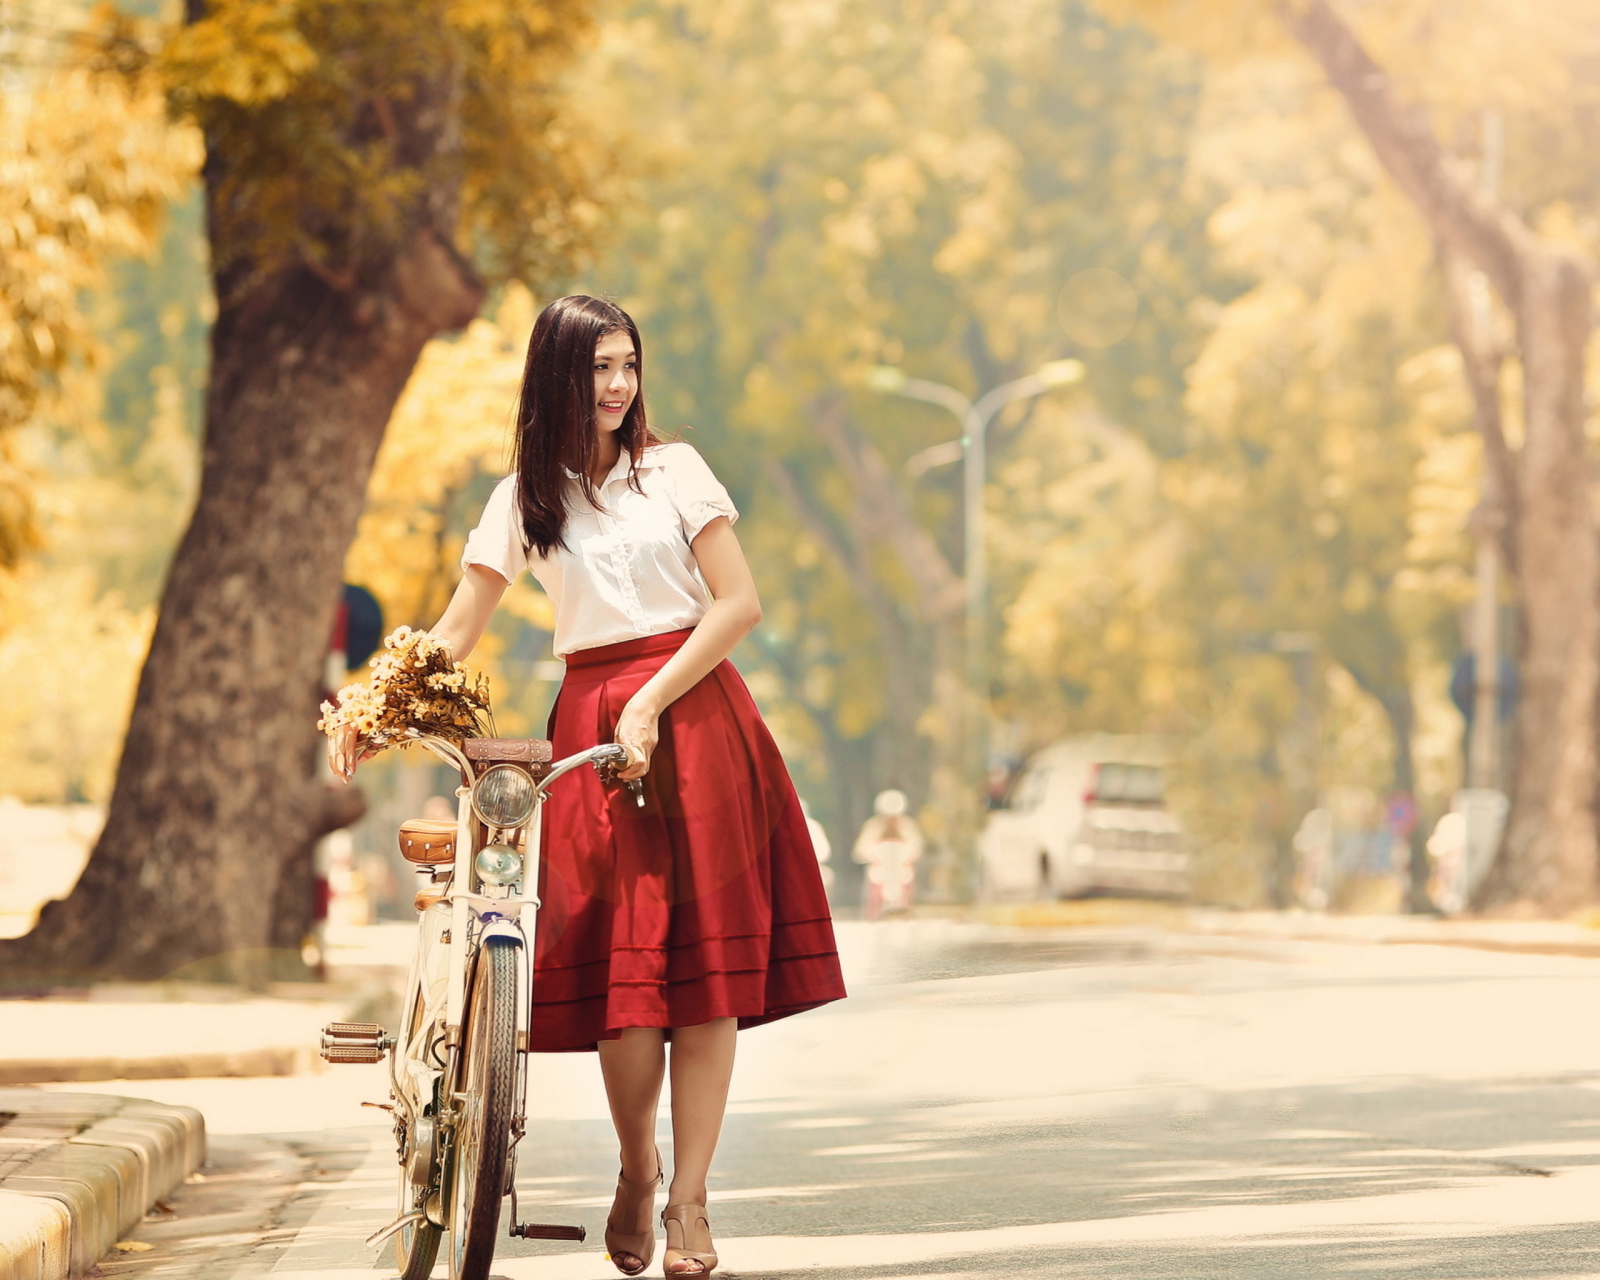 Fondo de pantalla Romantic Girl With Bicycle And Flowers 1600x1280